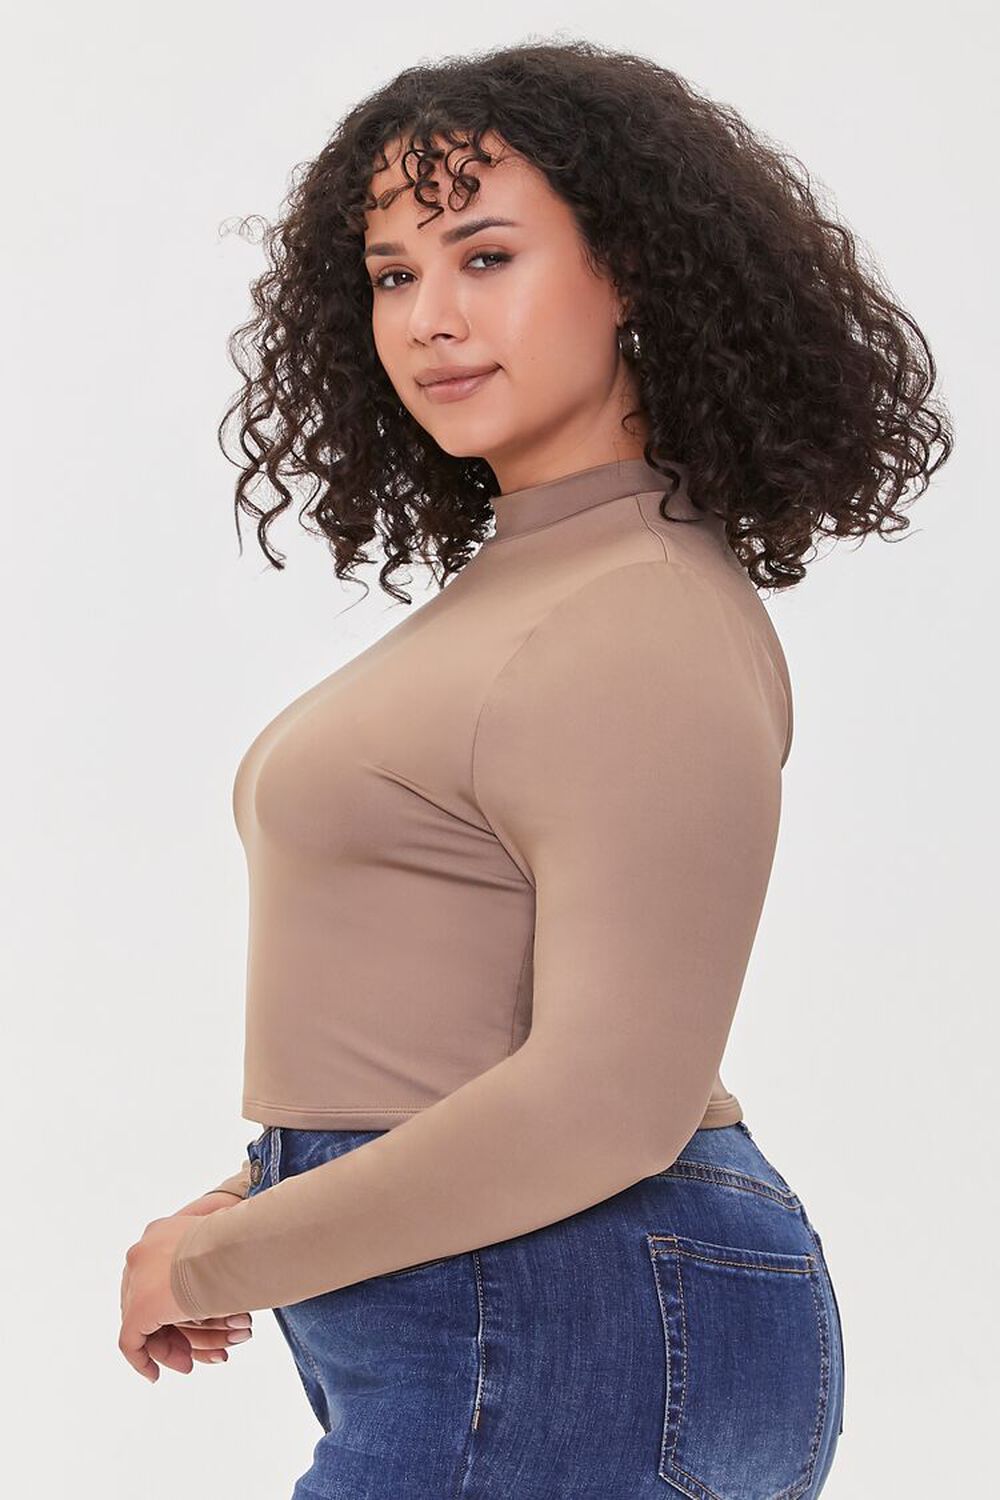 TAUPE Plus Size Mock Neck Crop Top, image 2